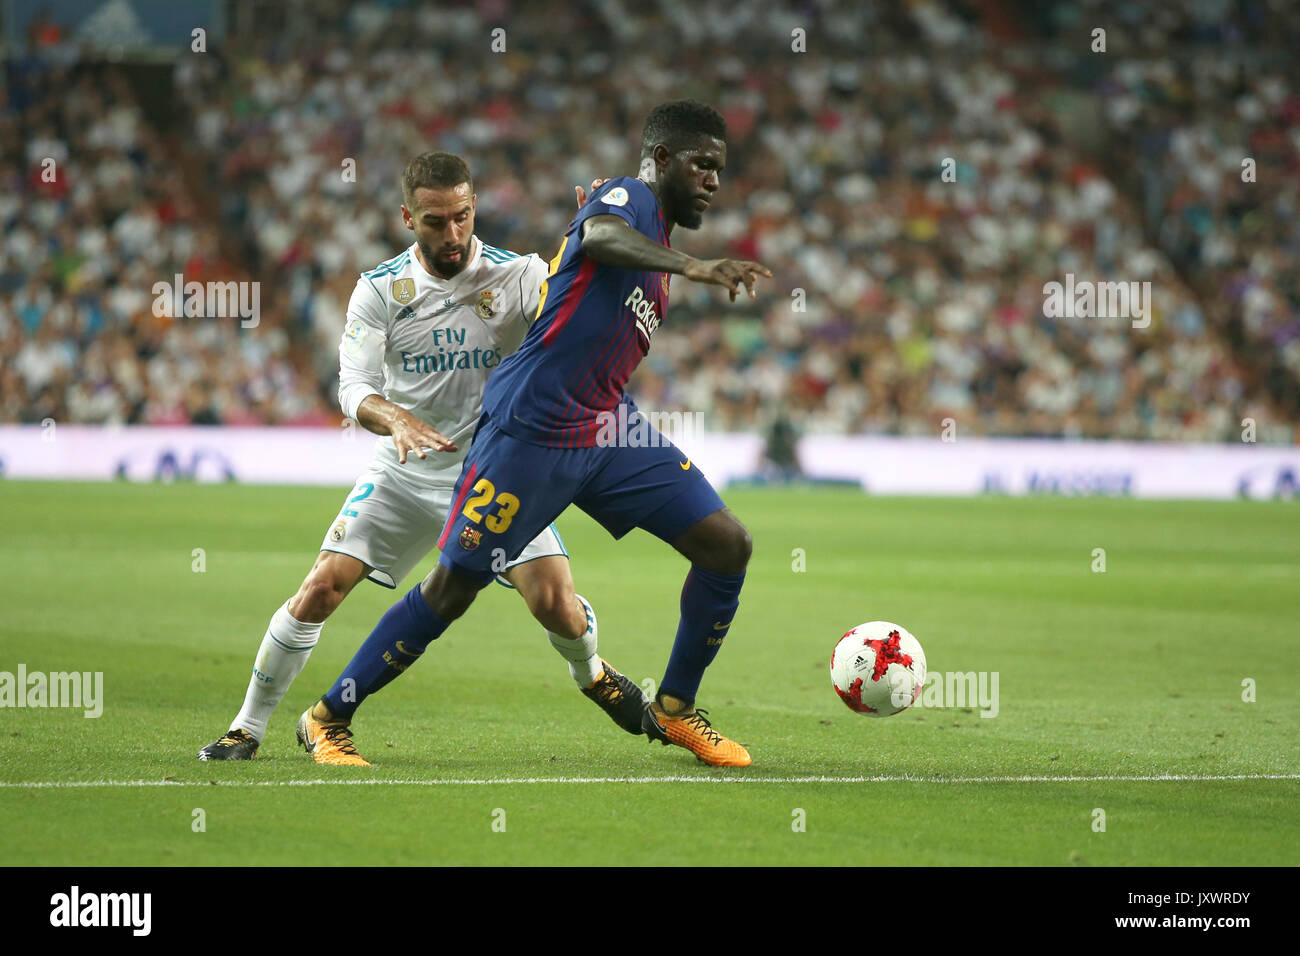 Samuel Umiti and Dani Carvajal. Real Madrid defeated Barcelona 2-0 in the second leg of the Spanish Supercup football match at the Santiago Bernabeu s Stock Photo